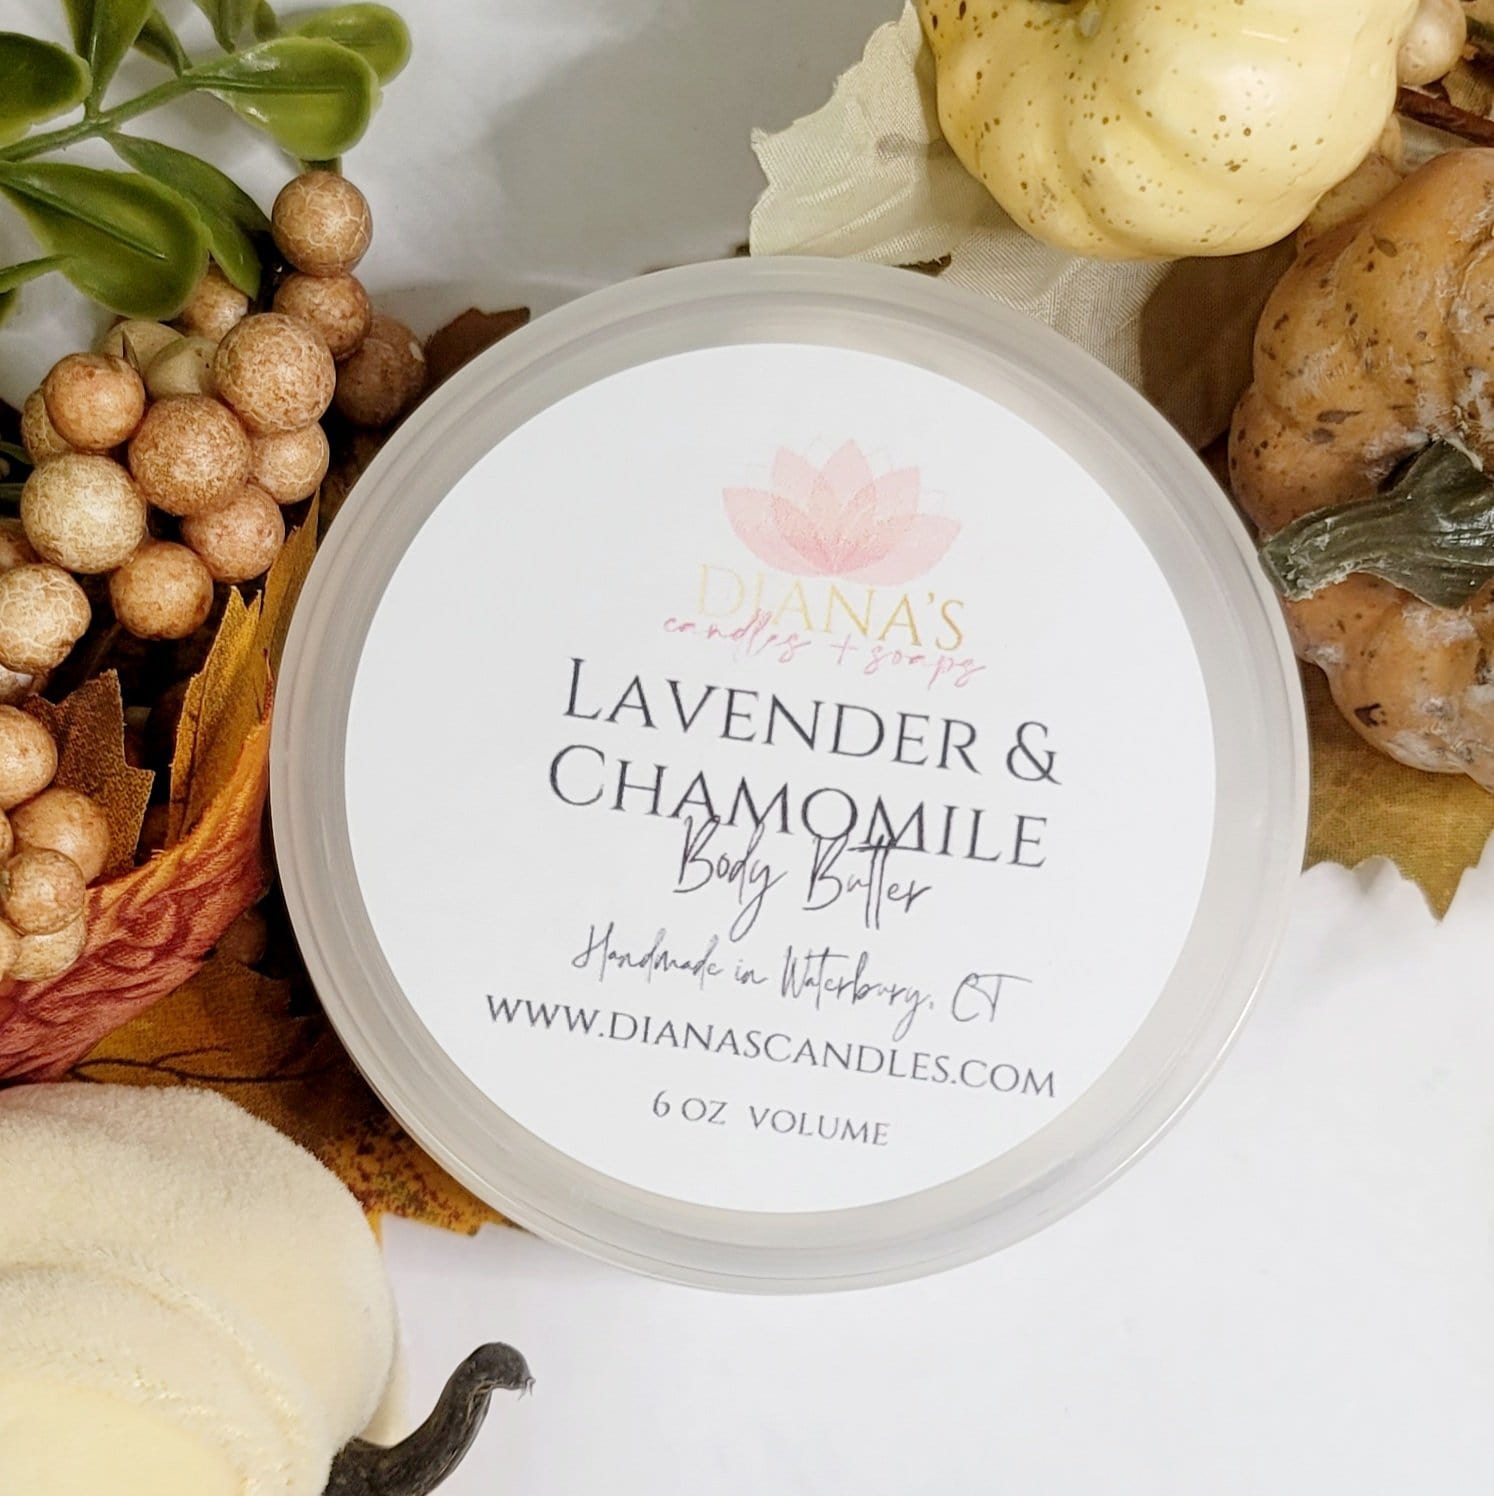 Lavender & Chamomile Body Butter Diana's Candles and Soaps 